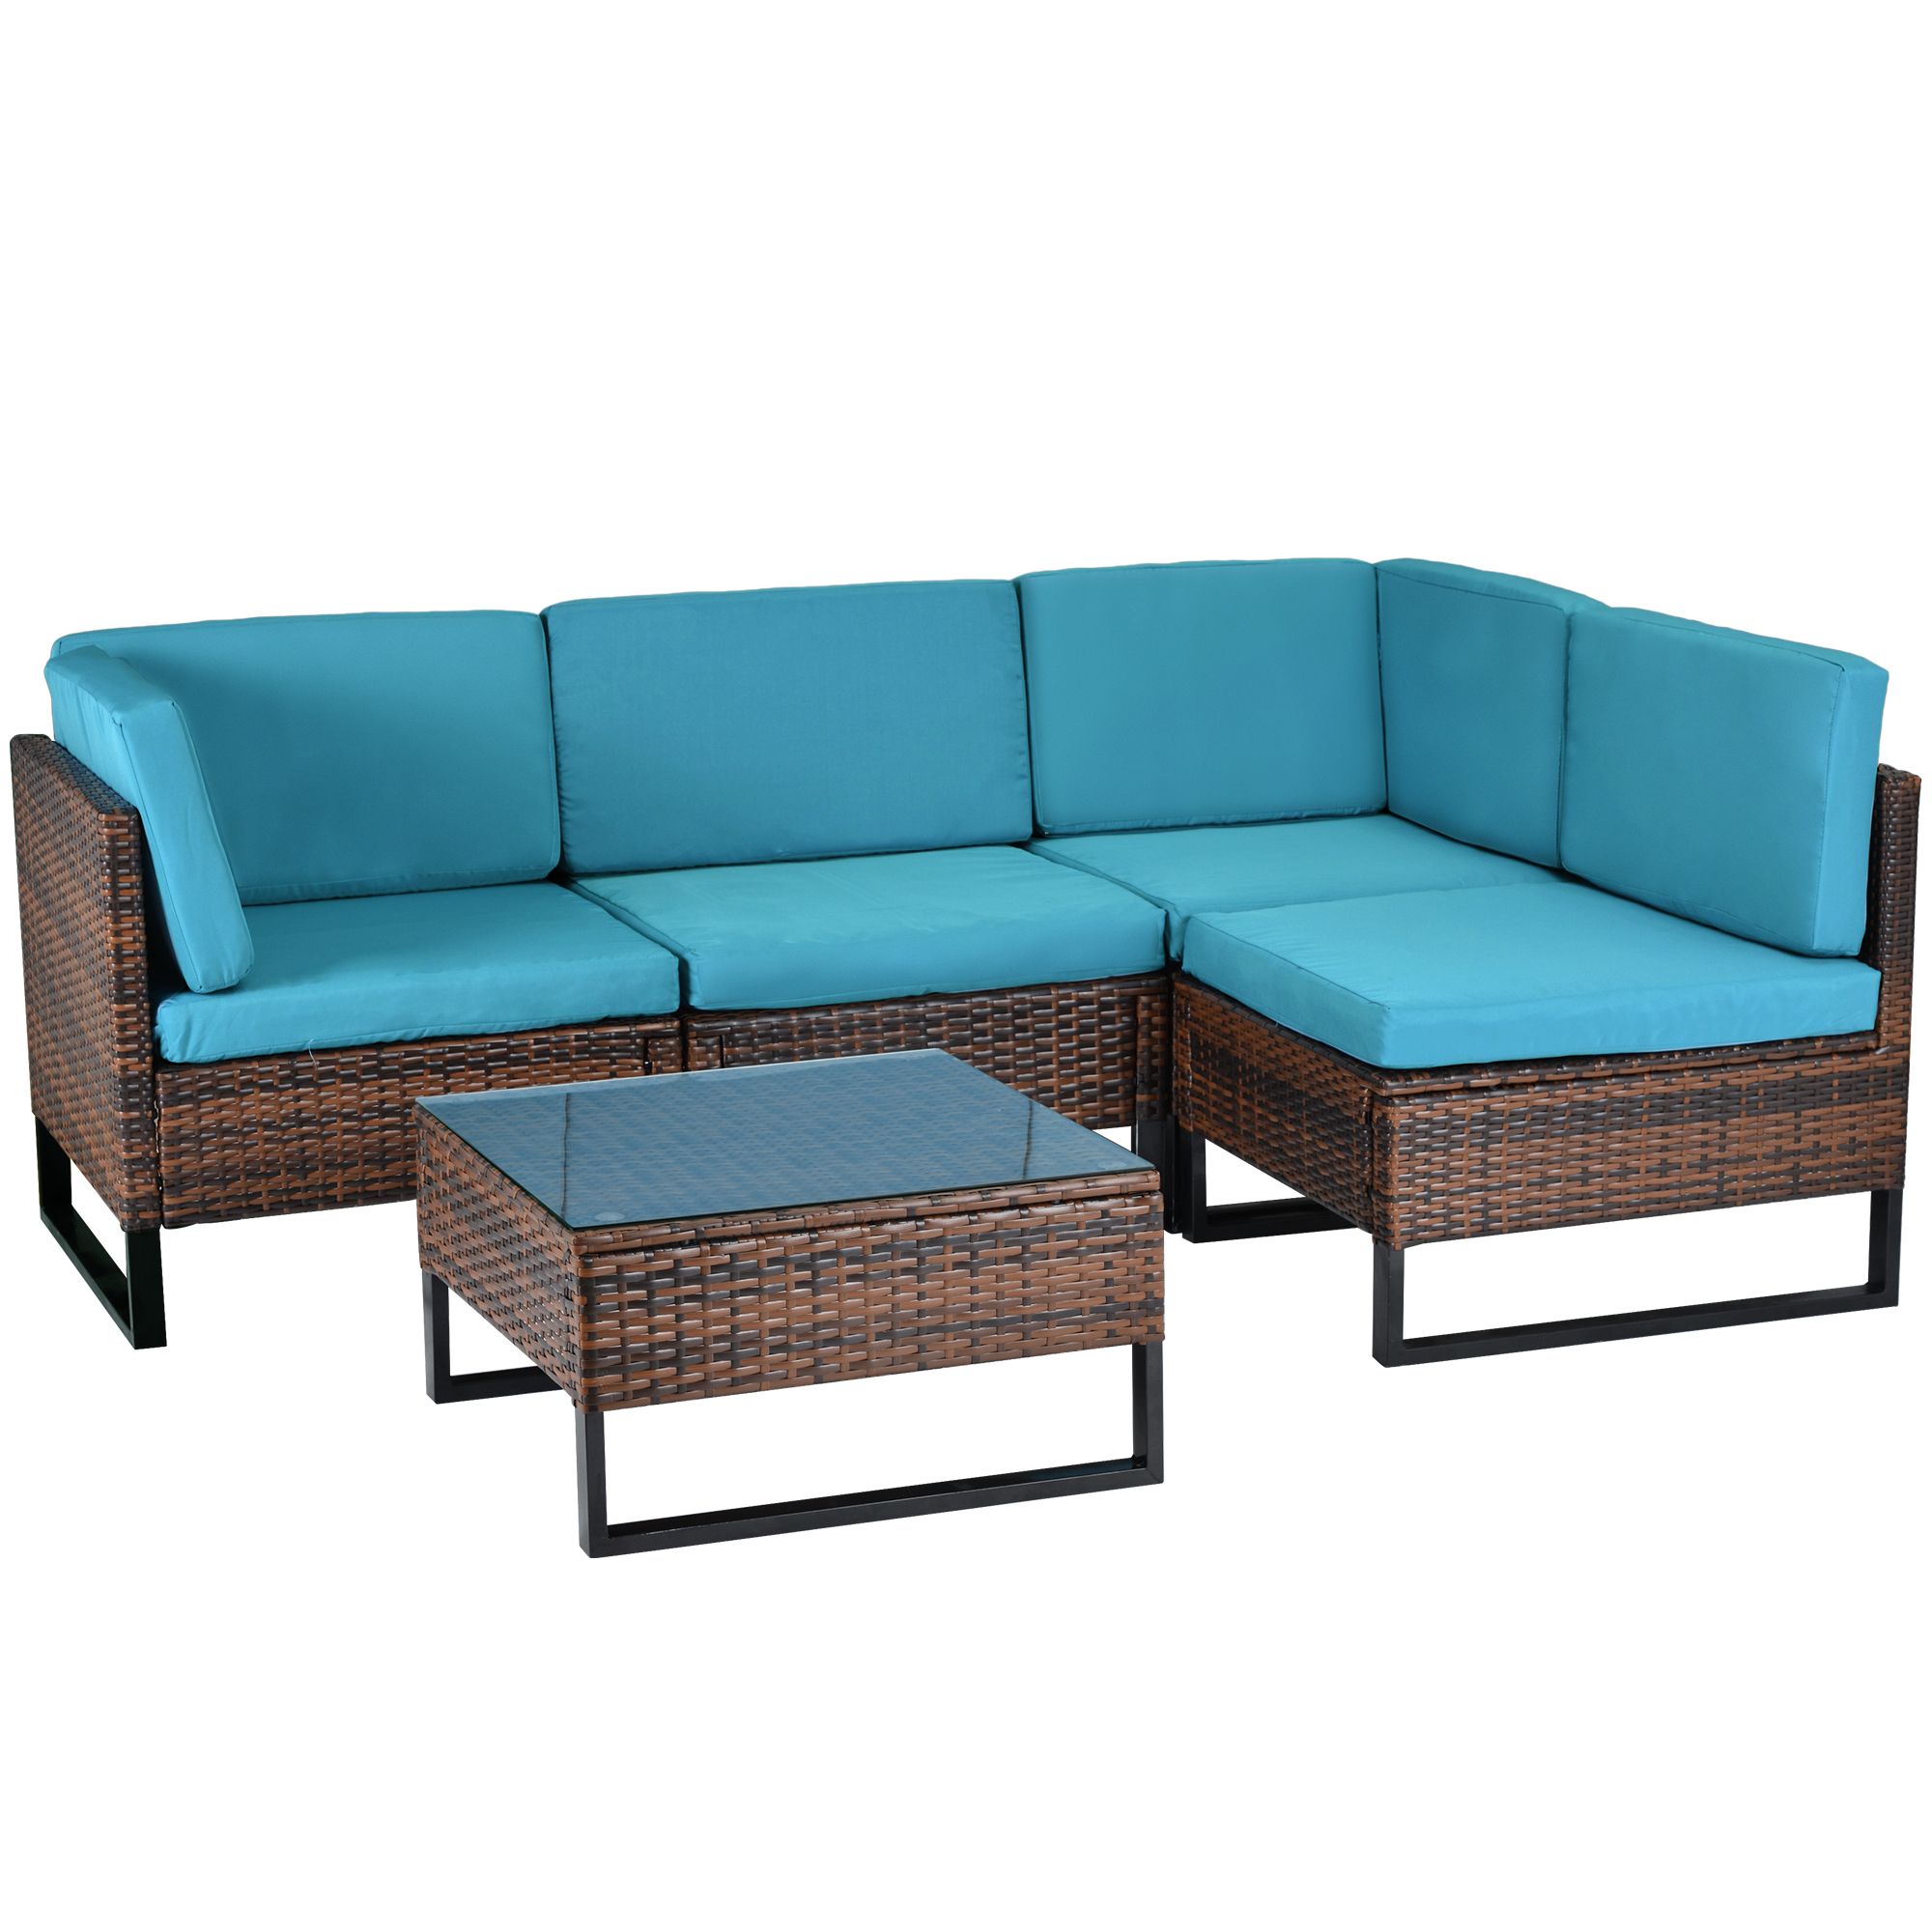 Wicker Patio Sectional Sets With Coffee Table, 2021 Regarding Widely Used 5 Piece Coffee Tables (View 15 of 21)